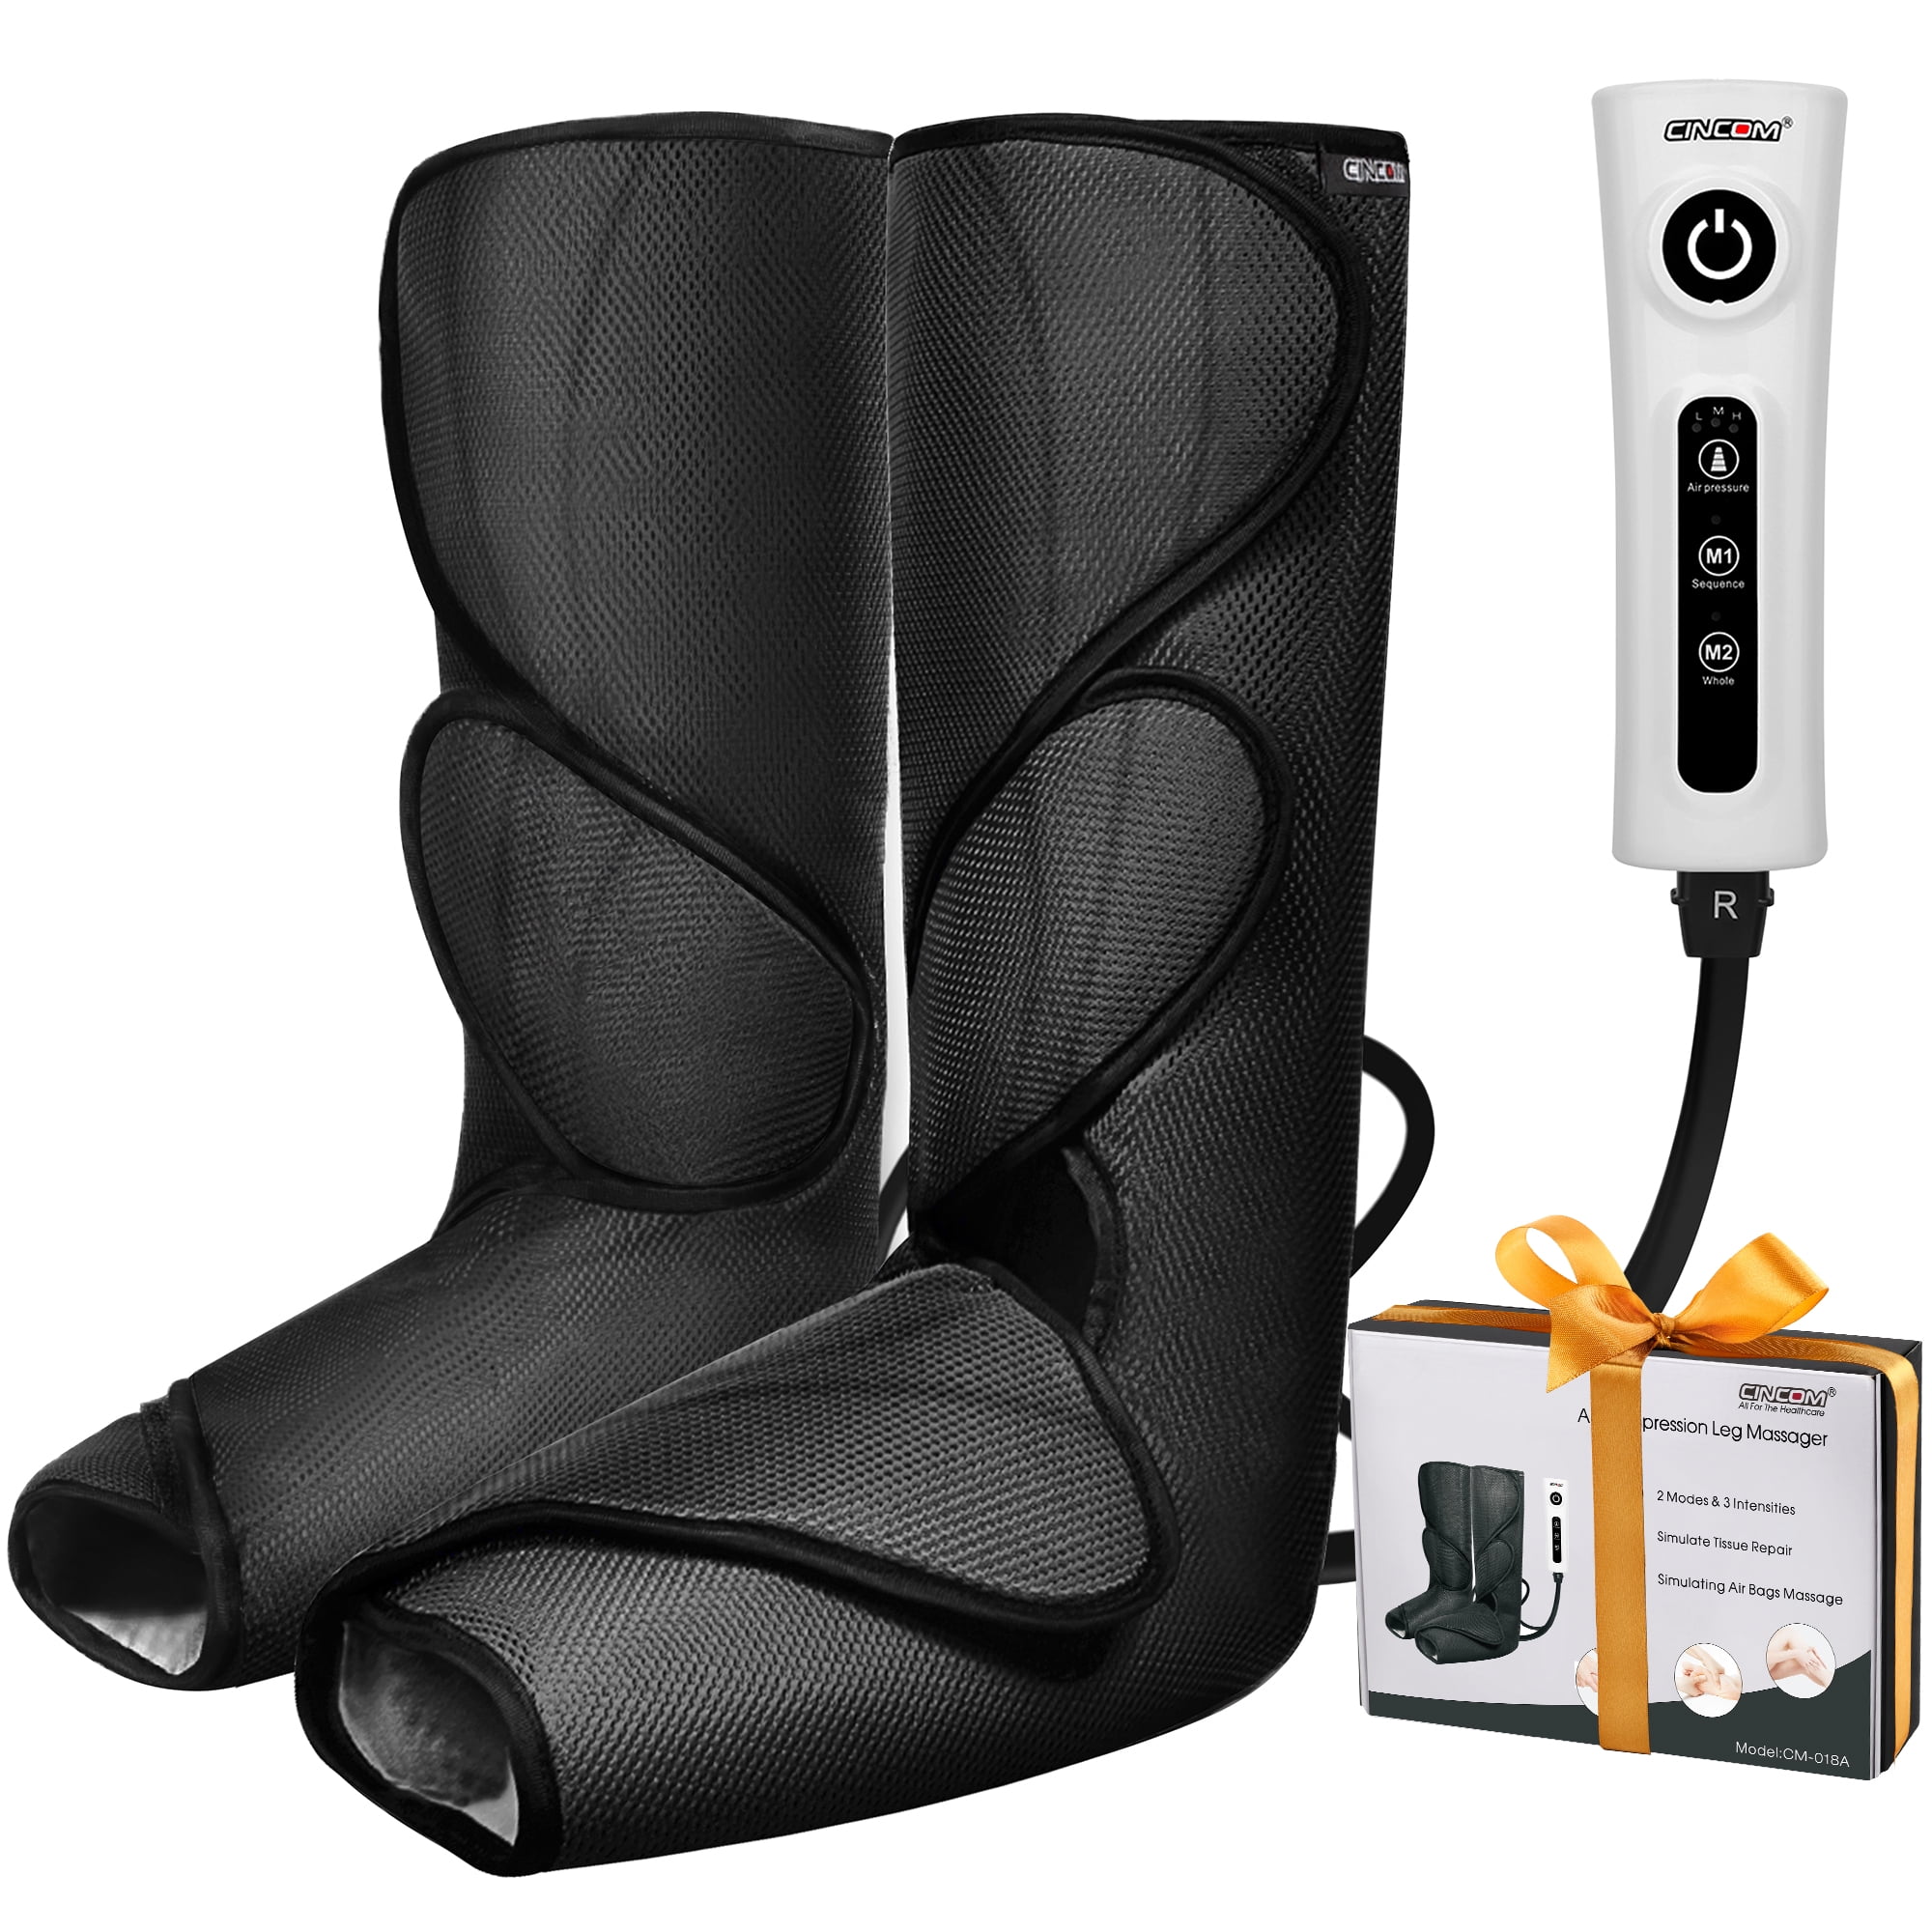 FIT KING Full Leg Air Compression Massager | FT-012A